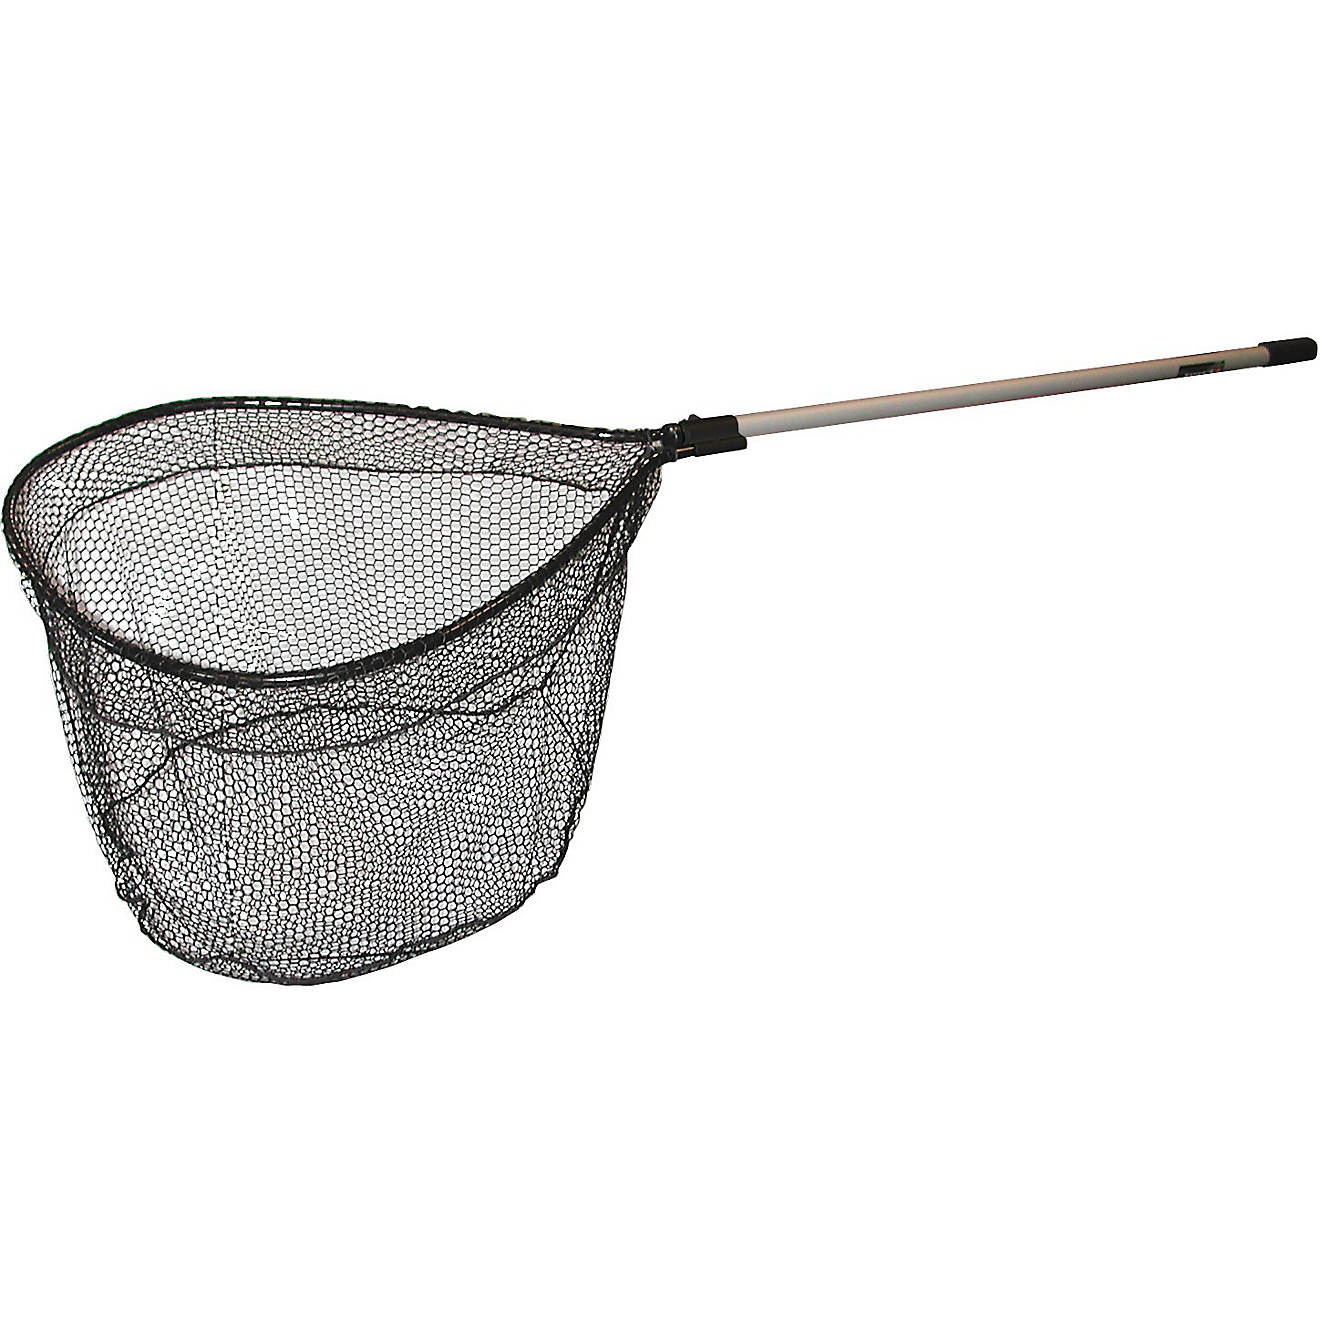 Frabill Pro-Formance 26 in x 30 in Halibut Landing Sliding Handle Net                                                            - view number 1